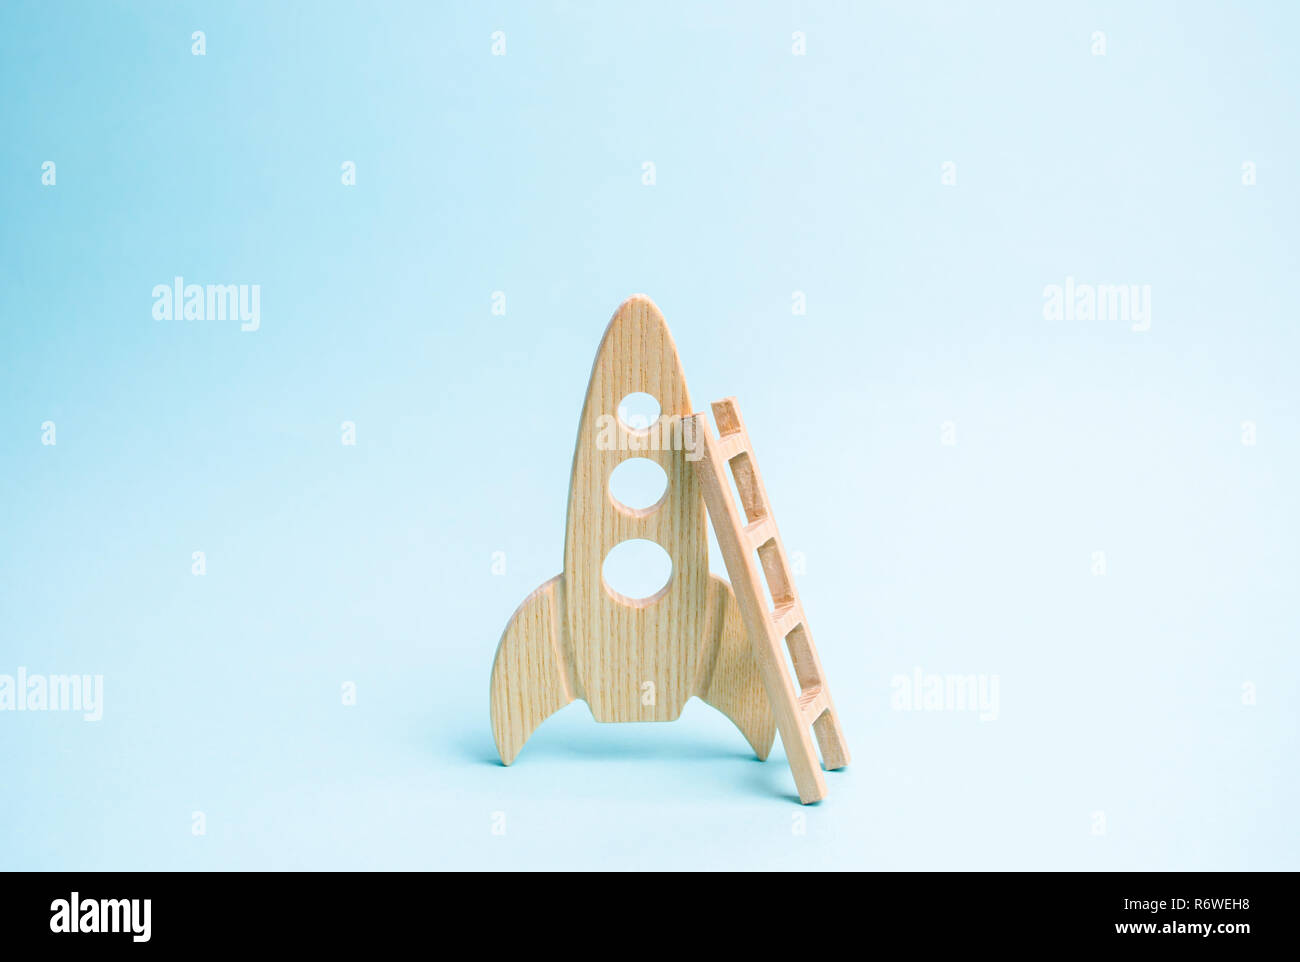 Rocket and ladder on a blue background. The rocket is ready to take off into space. The concept of a startup, education and the desire to research. Sp Stock Photo